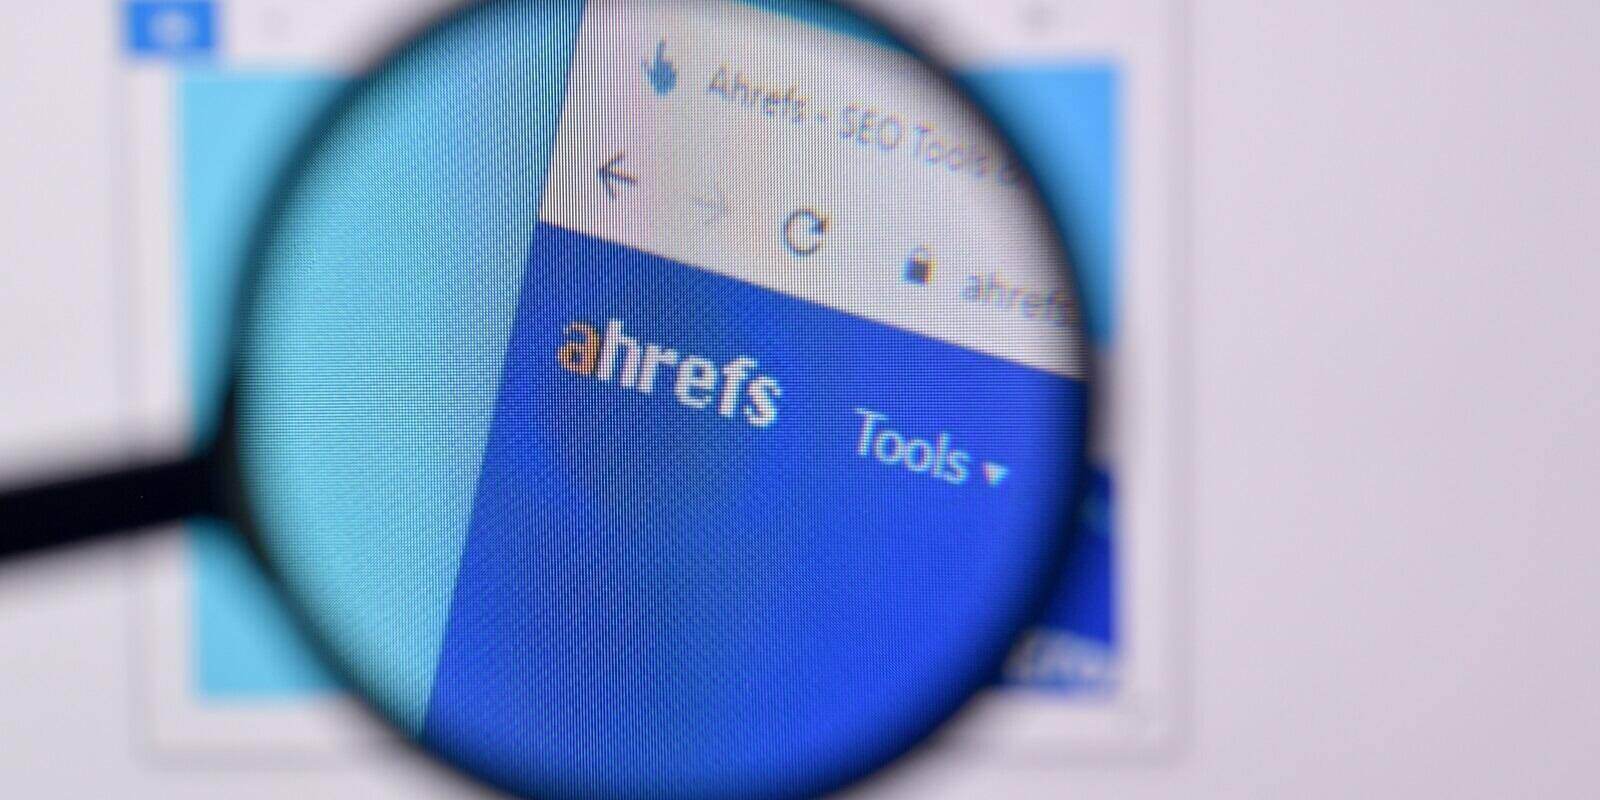 homepage of Ahrefs website on the display of pc